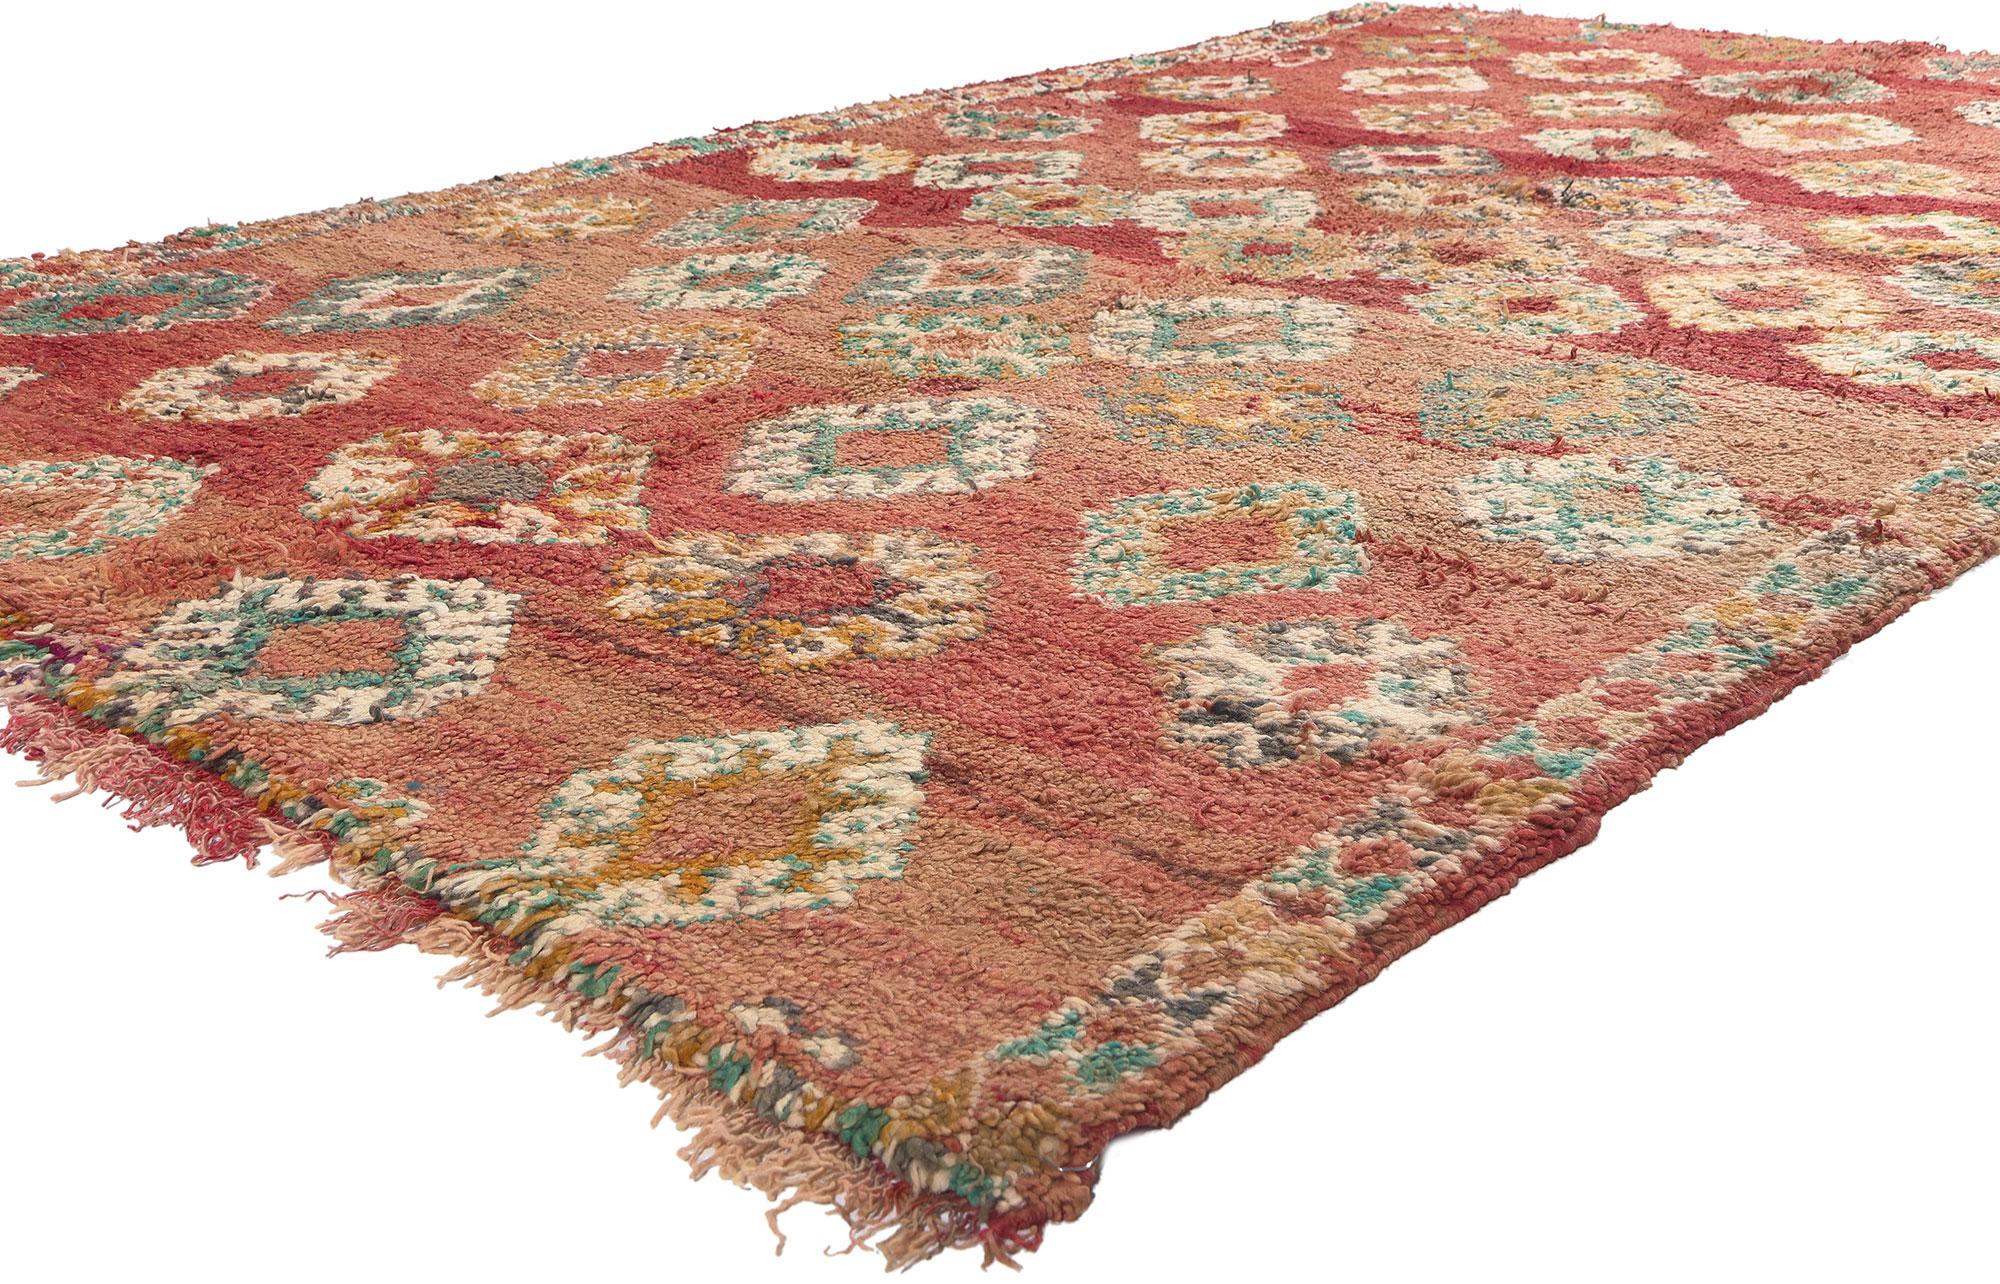 20916 Vintage Boujad Moroccan Rug, 05'10 x 09'08. Celebrate the vibrant spirit of Boujad rugs, originating from the lively city of Boujad in the Khouribga region. These Moroccan rugs are cherished for their eccentric and artistic designs. Nestled in